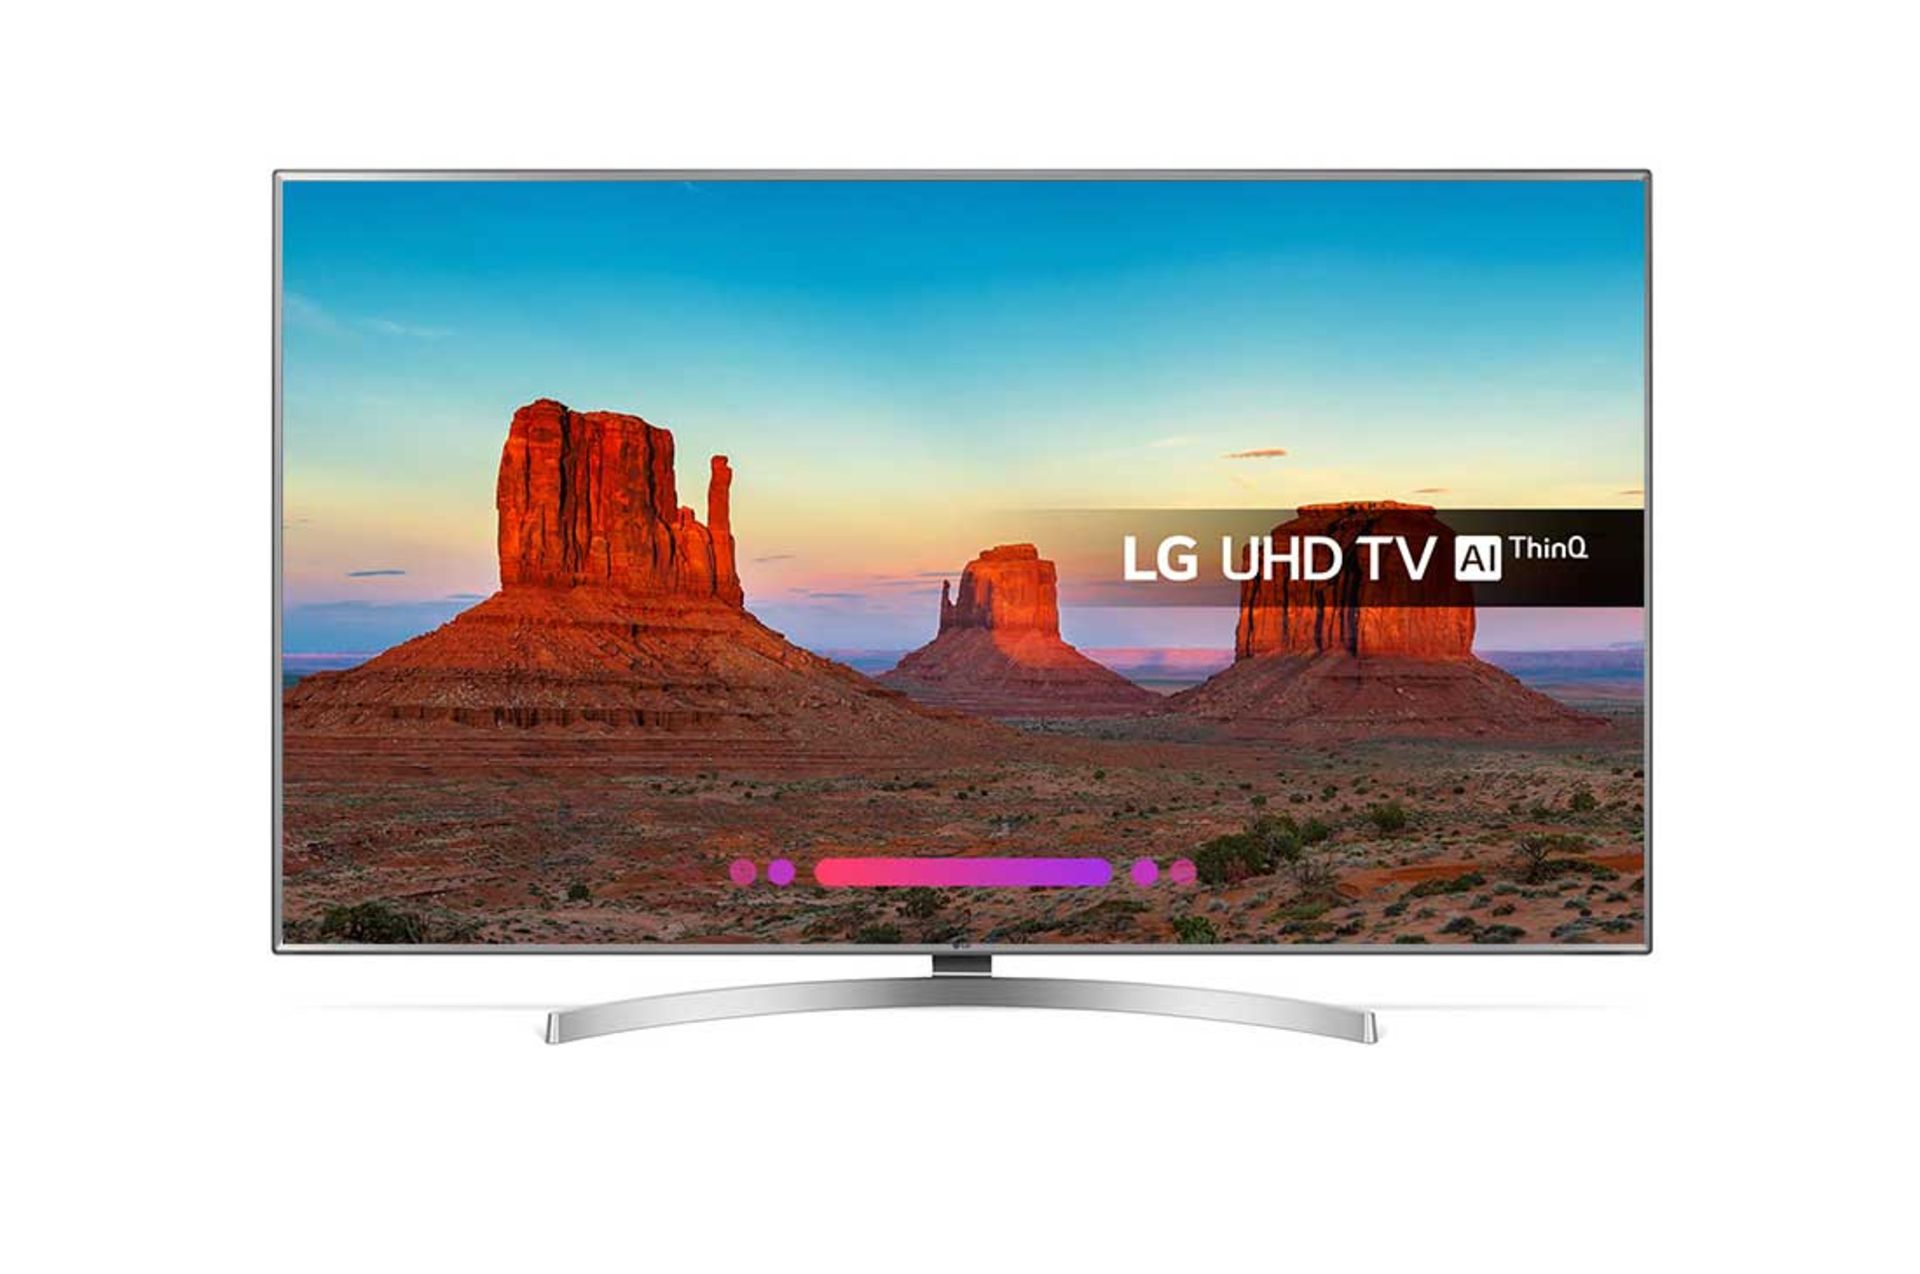 V Grade A LG 70 Inch ACTIVE HDR 4K UHD LED SMART TV WITH FREEVIEW HD, WEBOS, WIFI, AI TV